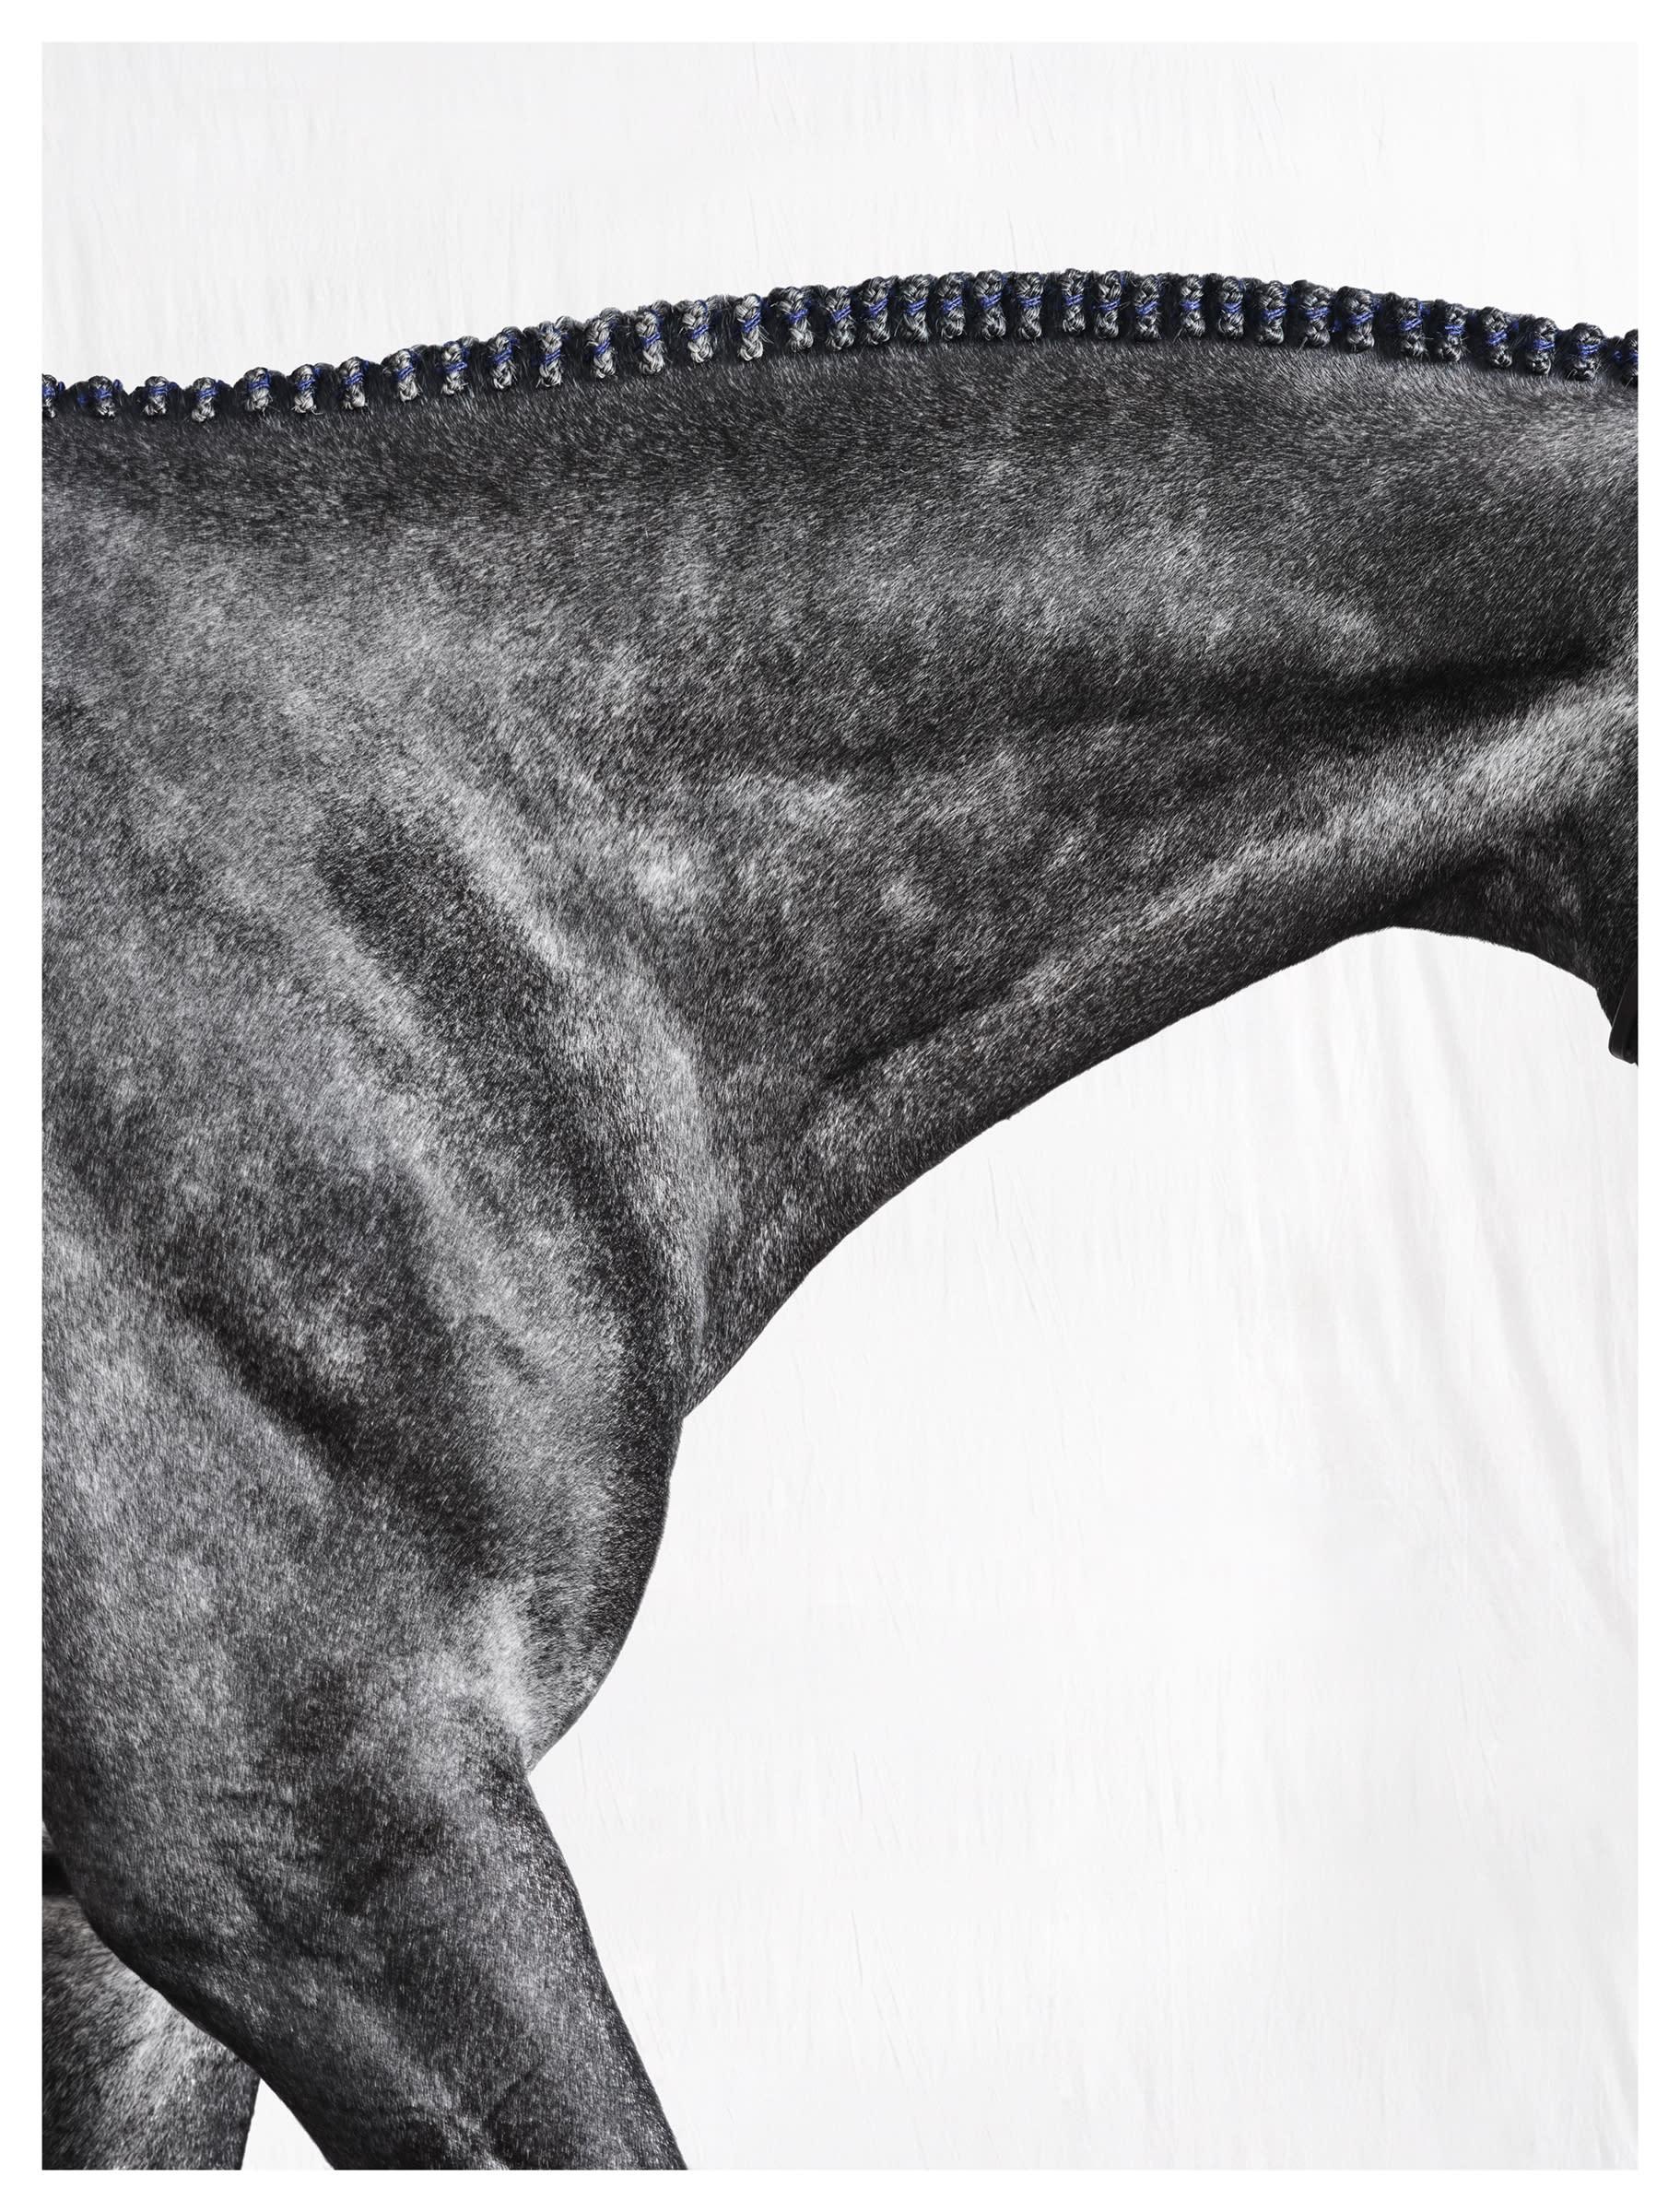 Juan Lamarca Abstract Photograph - Optimist I - Black and White Limited Edition Horse Portrait 2015